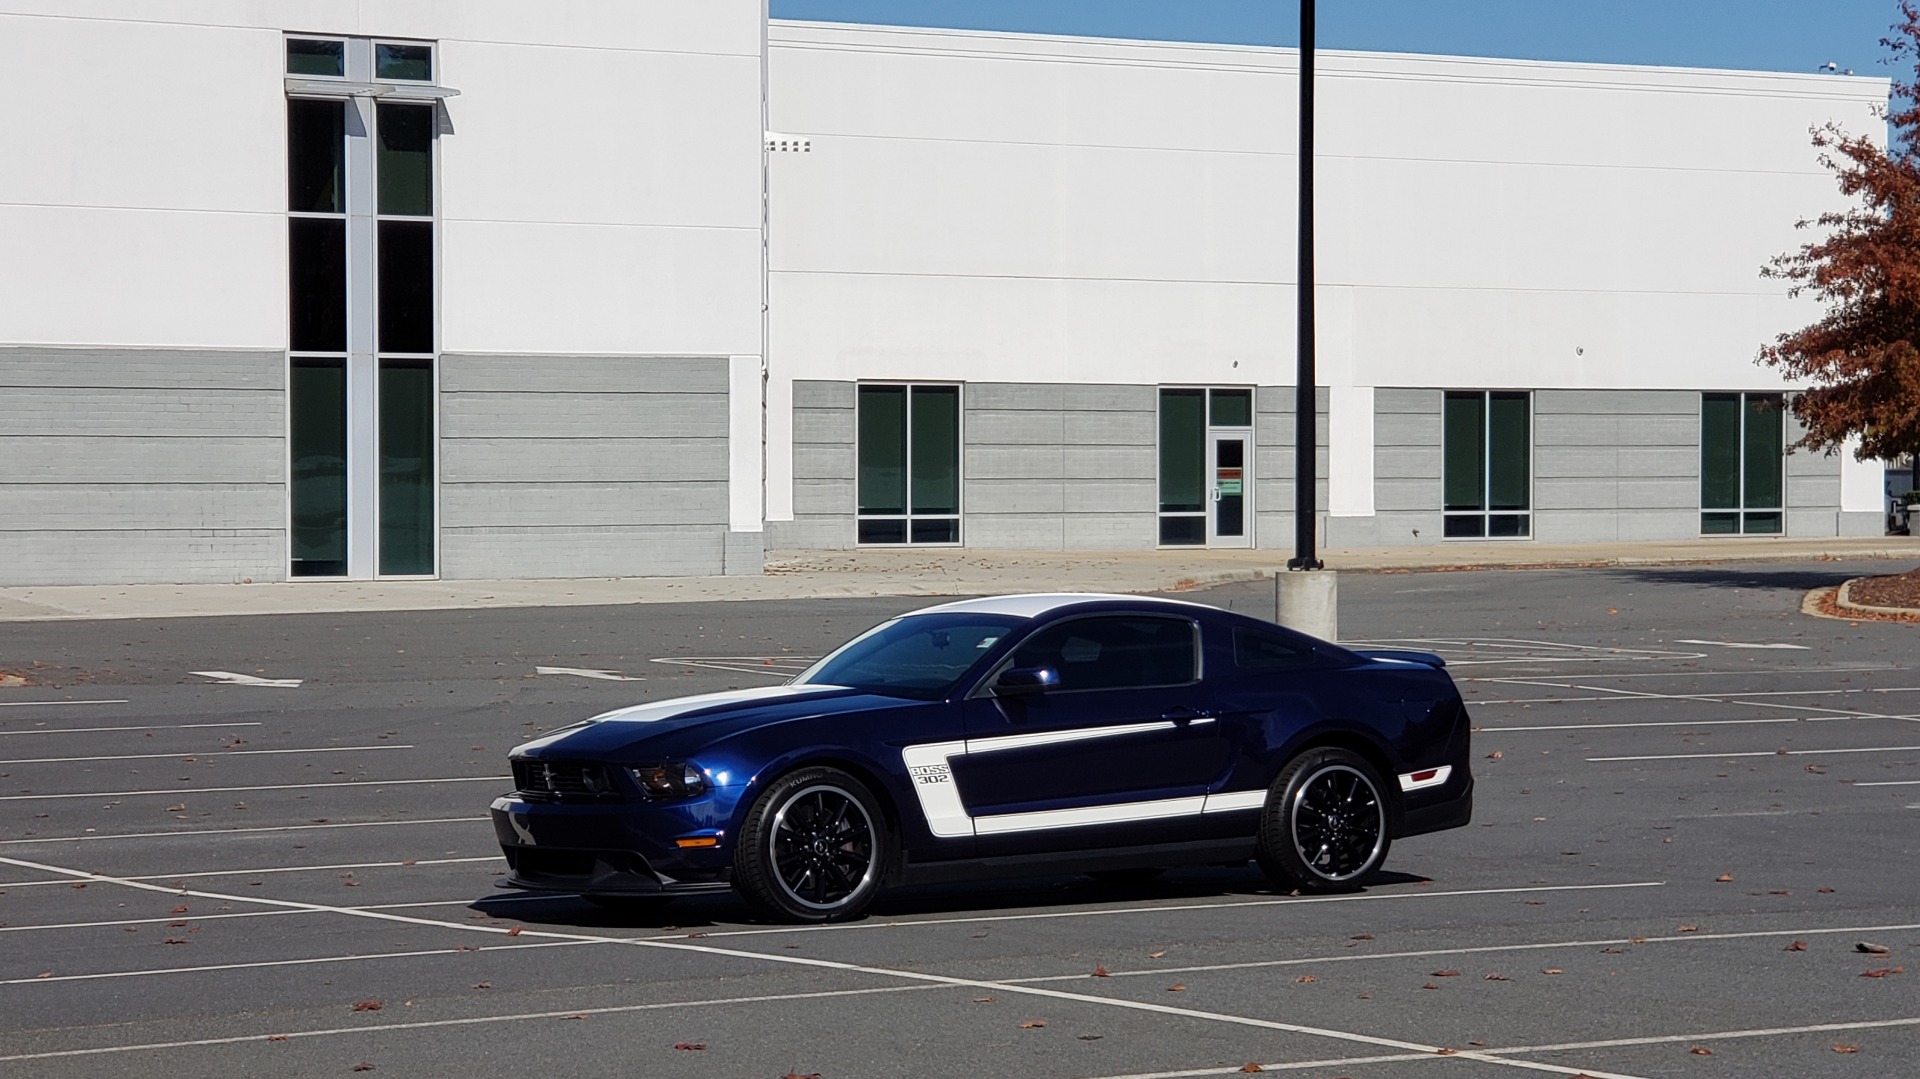 Used 2012 Ford MUSTANG BOSS 302 COUPE / 5.0L / 6-SPD MAN / RECARO SEATS / 3.73 GEARS for sale Sold at Formula Imports in Charlotte NC 28227 85